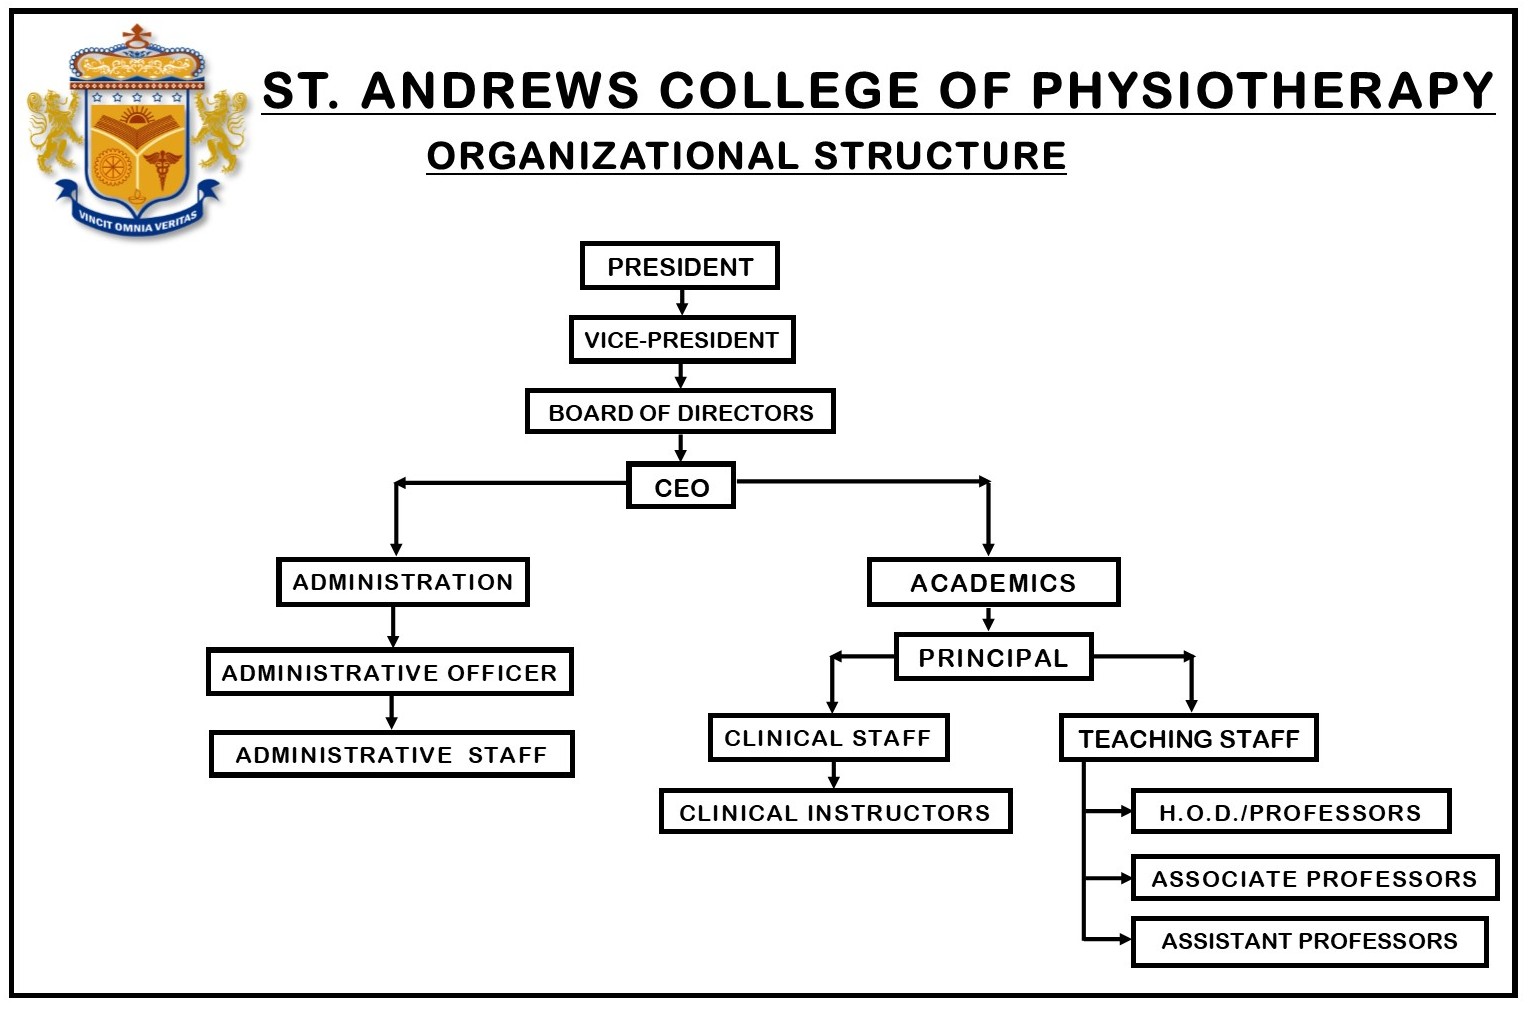 St. Andrews College of physiotherapy